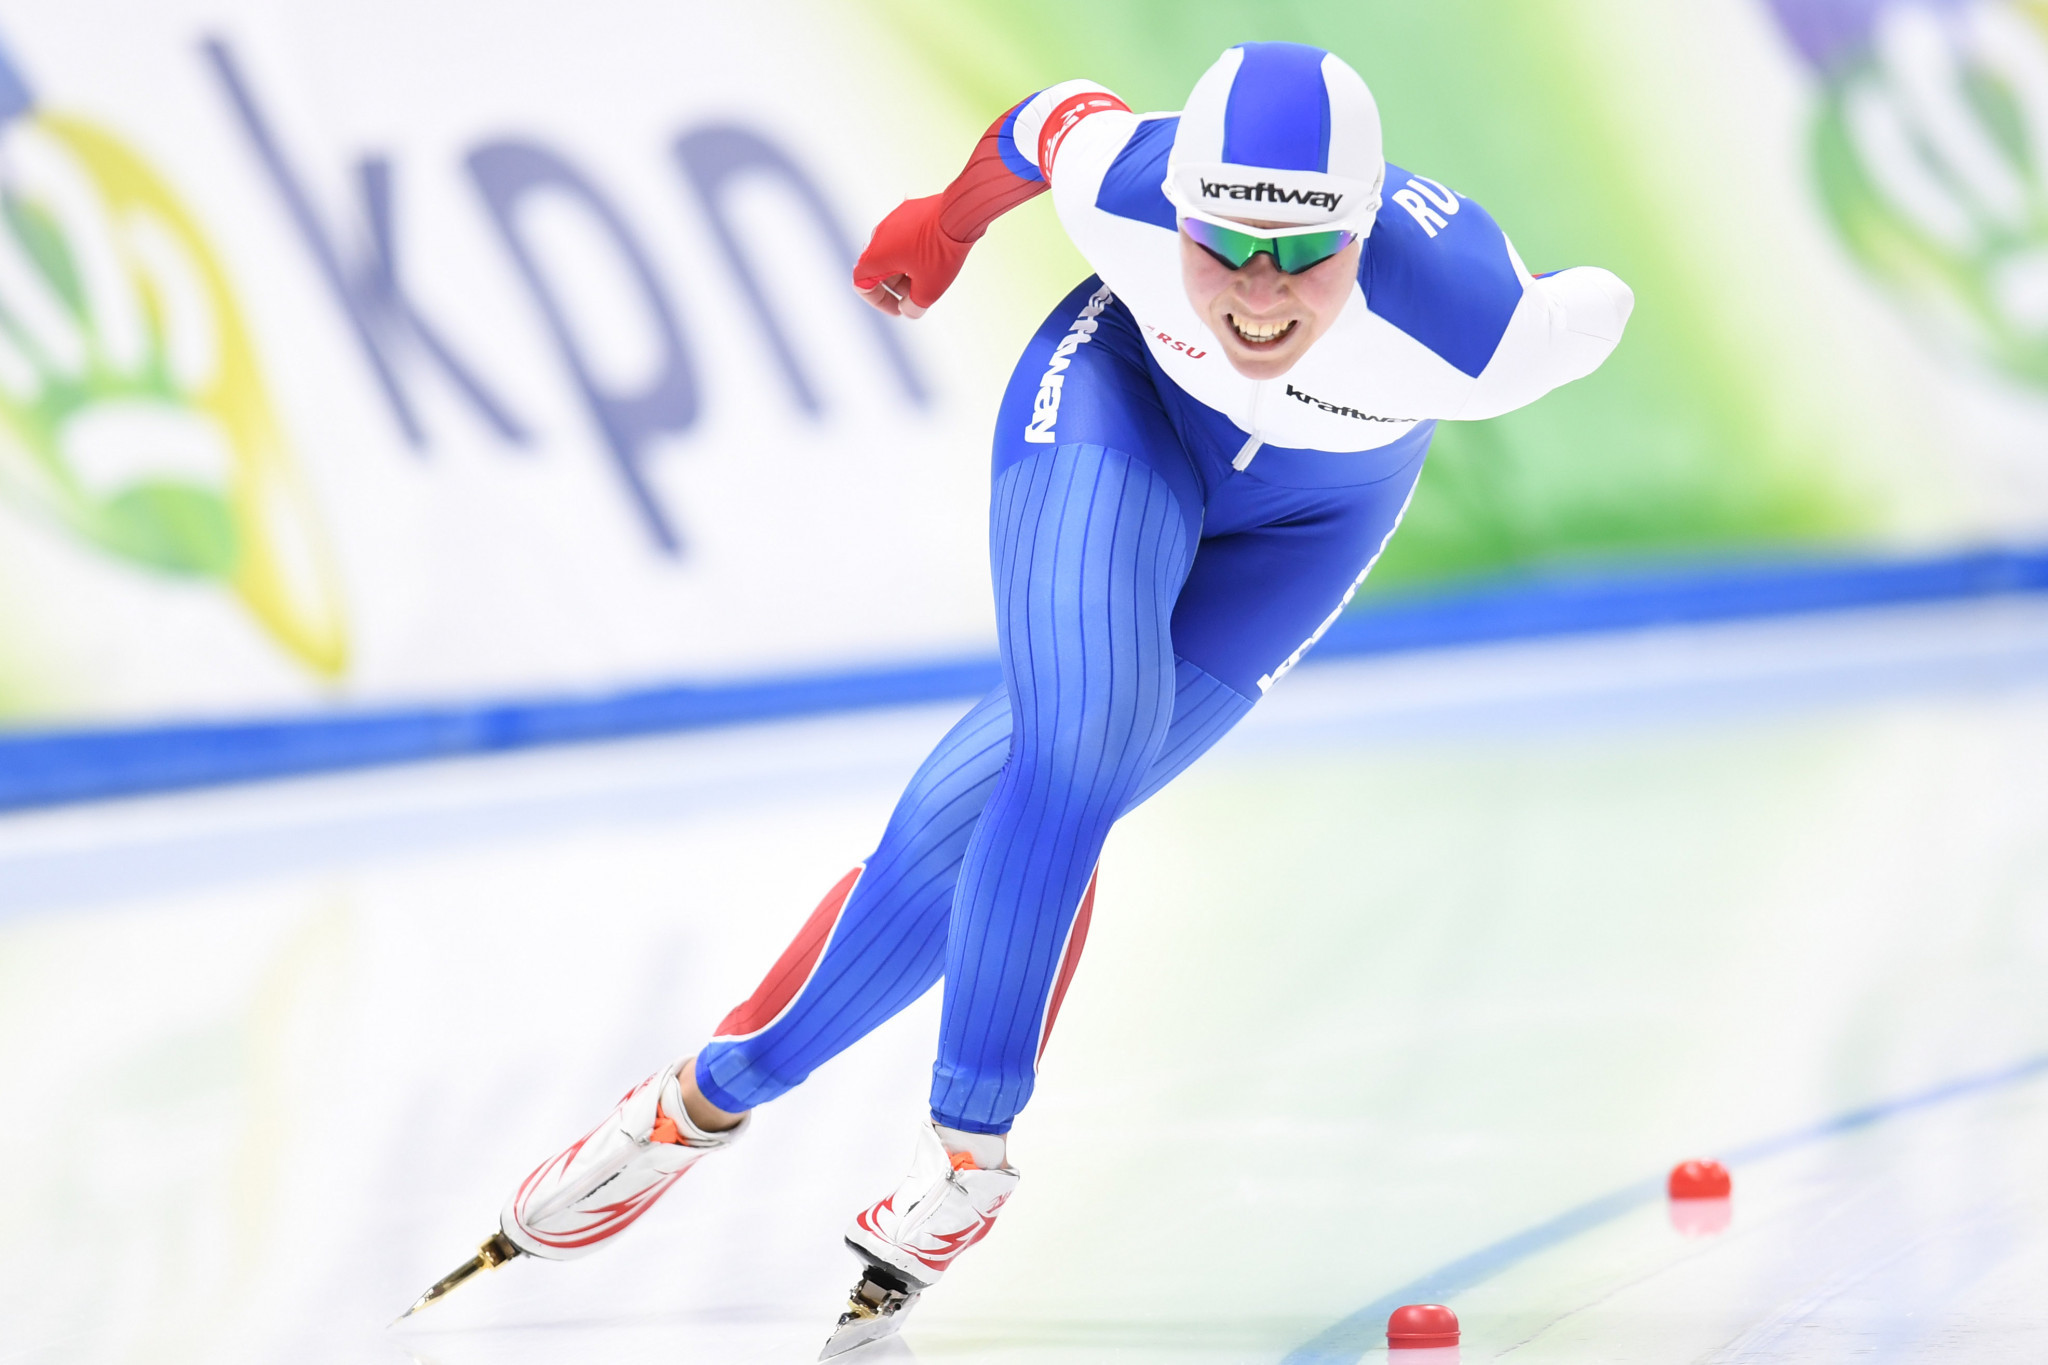 Speed skater Olga Graf has become the first Russian athlete cleared to compete at next month's Winter Olympic Games in Pyeongchang to turn down an invitation ©Getty Images